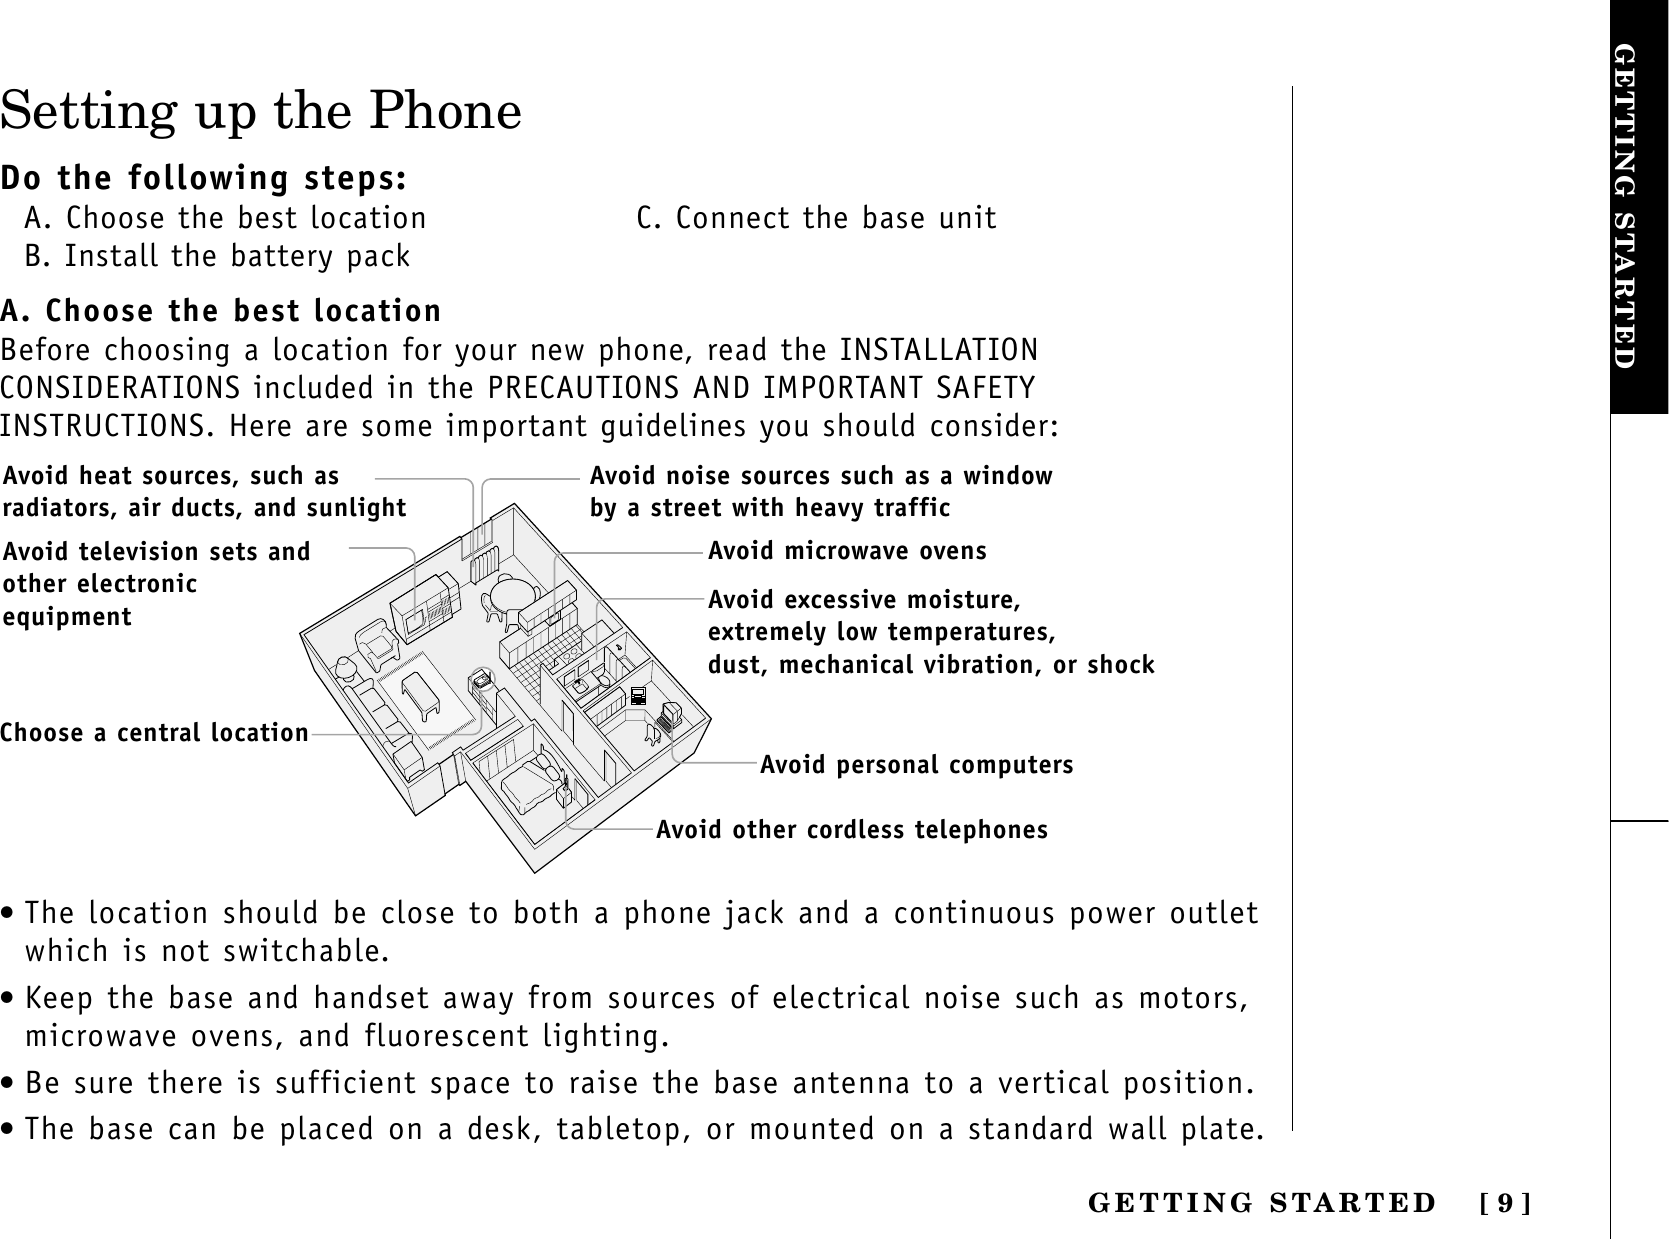 [ 9 ]GETTING STARTEDGETTING STARTEDSetting up the PhoneDo the following steps:A. Choose the best location C. Connect the base unitB. Install the battery packA. Choose the best locationBefore choosing a location for your new phone, read the INSTALLATIONCONSIDERATIONS included in the PRECAUTIONS AND IMPORTANT SAFETYINSTRUCTIONS. Here are some important guidelines you should consider:•The location should be close to both a phone jack and a continuous power outletwhich is not switchable.•Keep the base and handset away from sources of electrical noise such as motors,microwave ovens, and fluorescent lighting.•Be sure there is sufficient space to raise the base antenna to a vertical position.•The base can be placed on a desk, tabletop, or mounted on a standard wall plate.Avoid excessive moisture, extremely low temperatures, dust, mechanical vibration, or shockAvoid heat sources, such asradiators, air ducts, and sunlightAvoid television sets andother electronicequipmentAvoid noise sources such as a windowby a street with heavy trafficAvoid microwave ovensAvoid personal computersAvoid other cordless telephonesChoose a central location